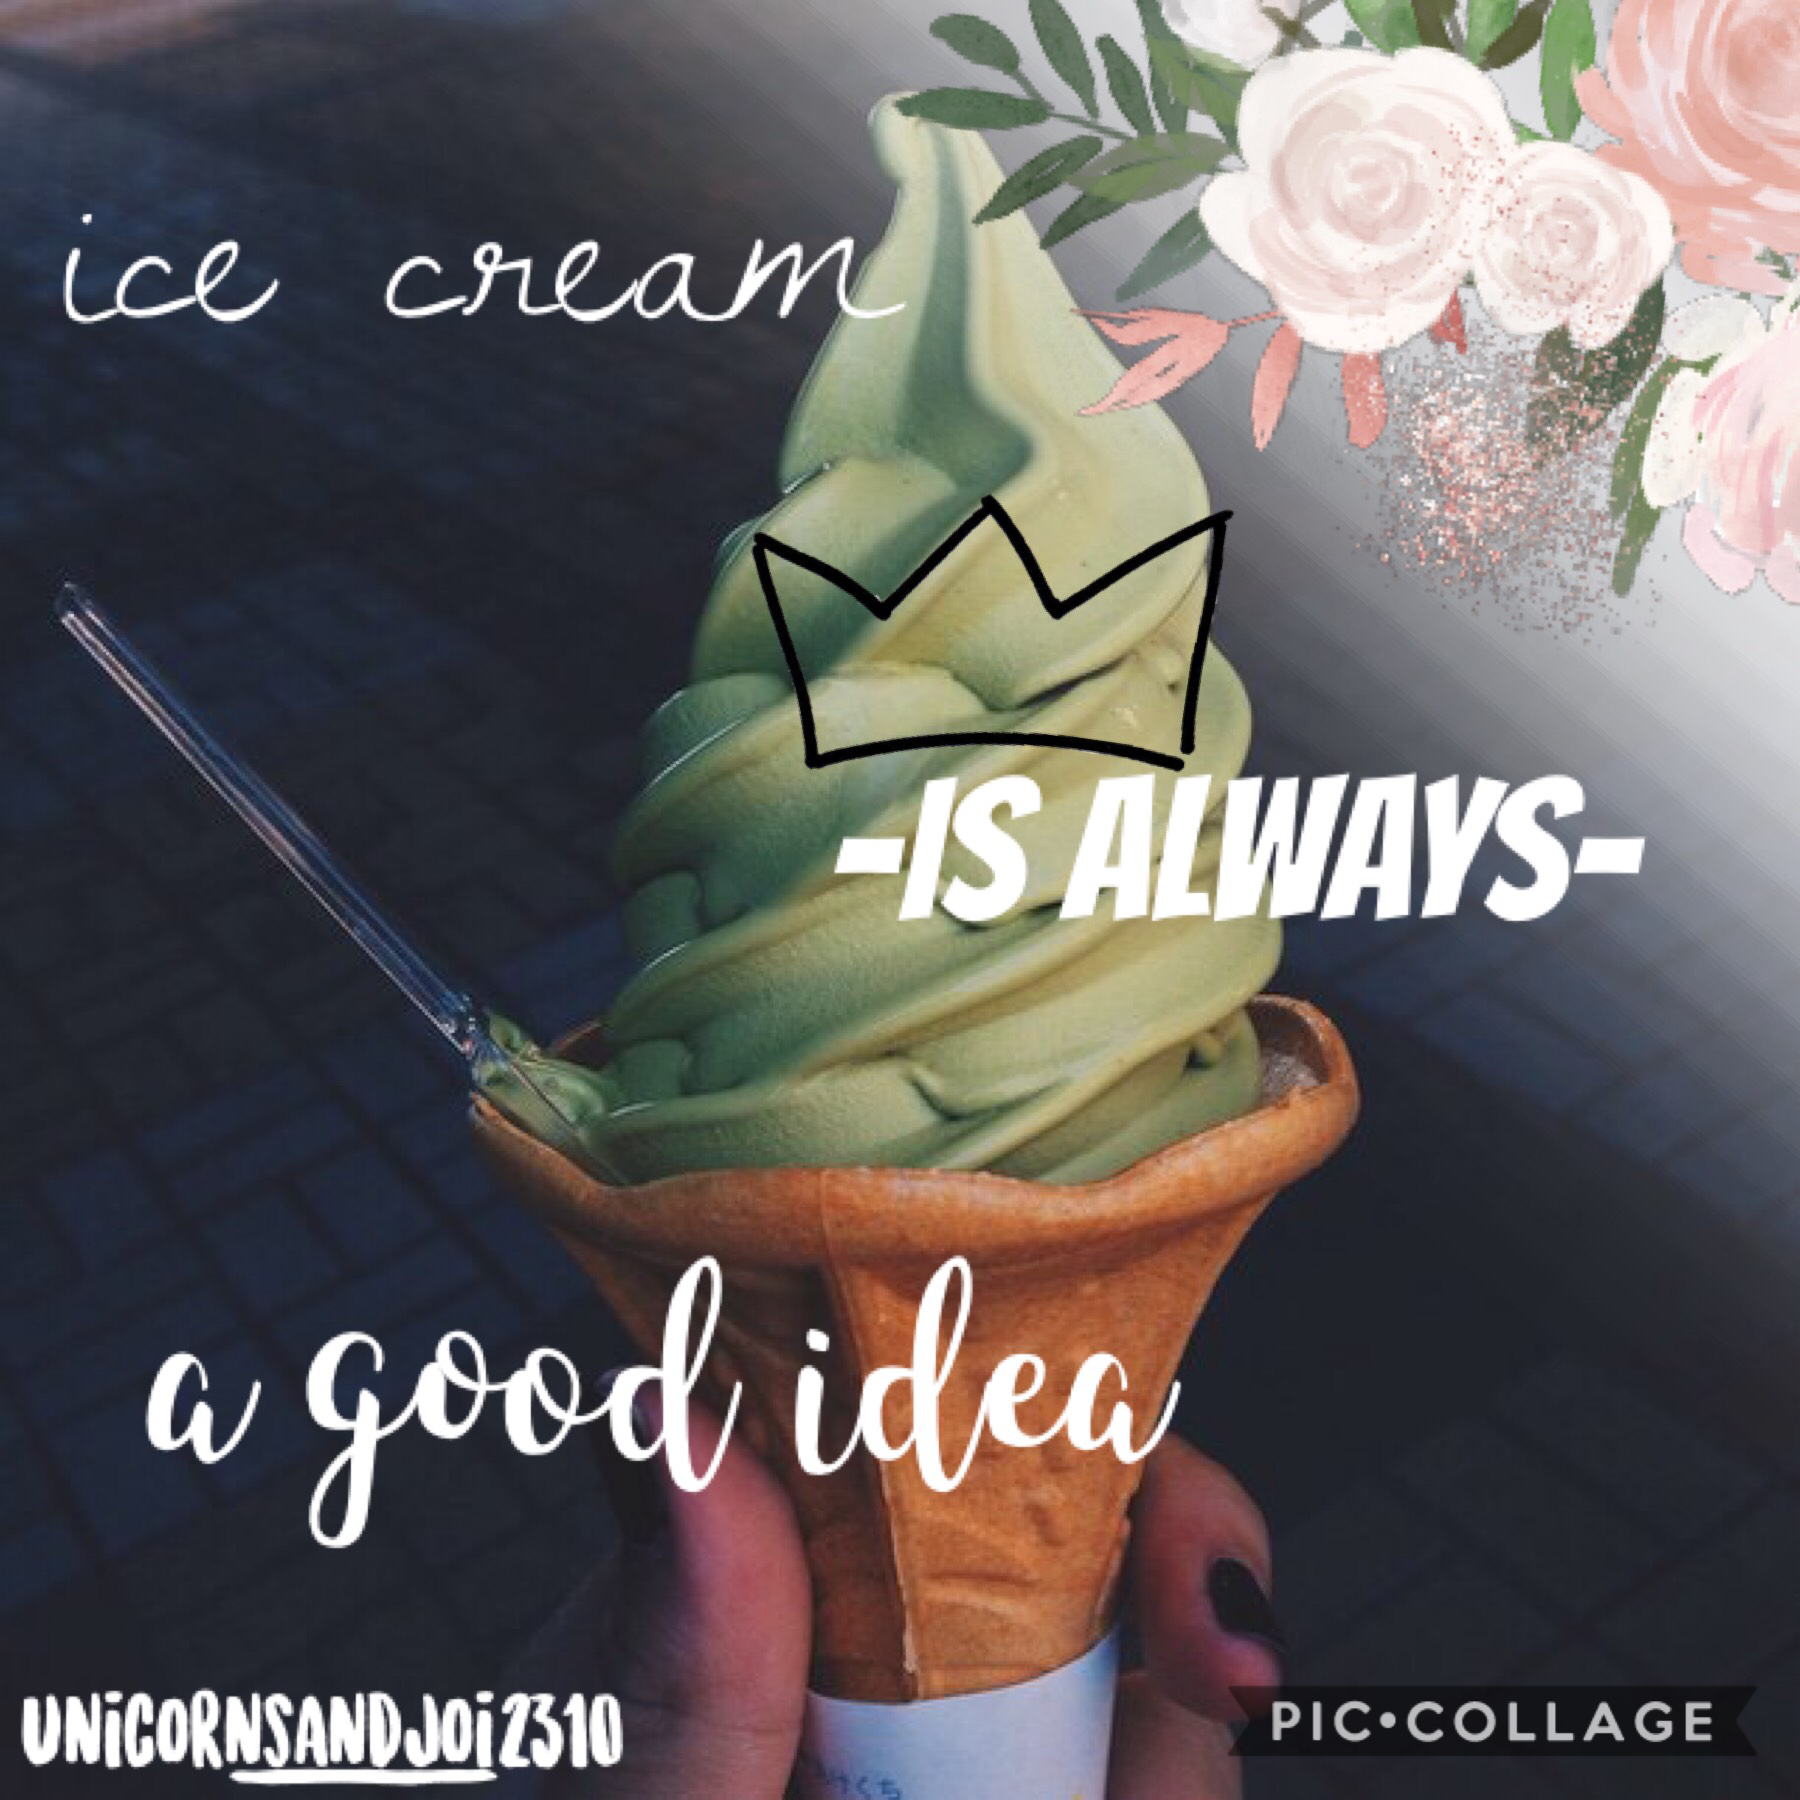 Comment your favorite type of icecream!!